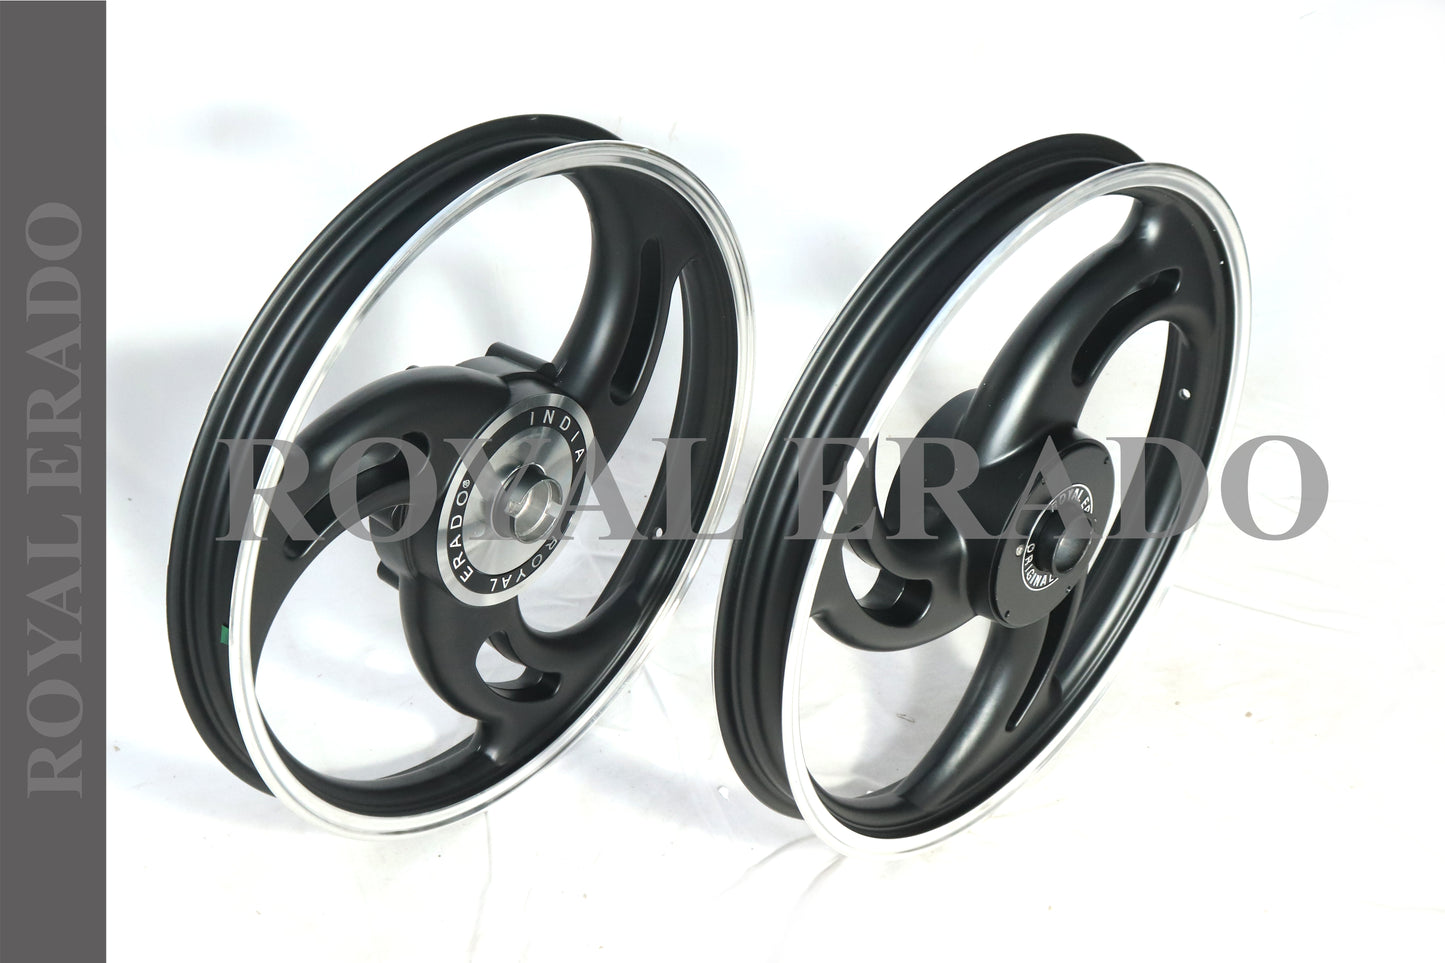 3 Spokes black alloy wheel for thunderbird and classic double disc